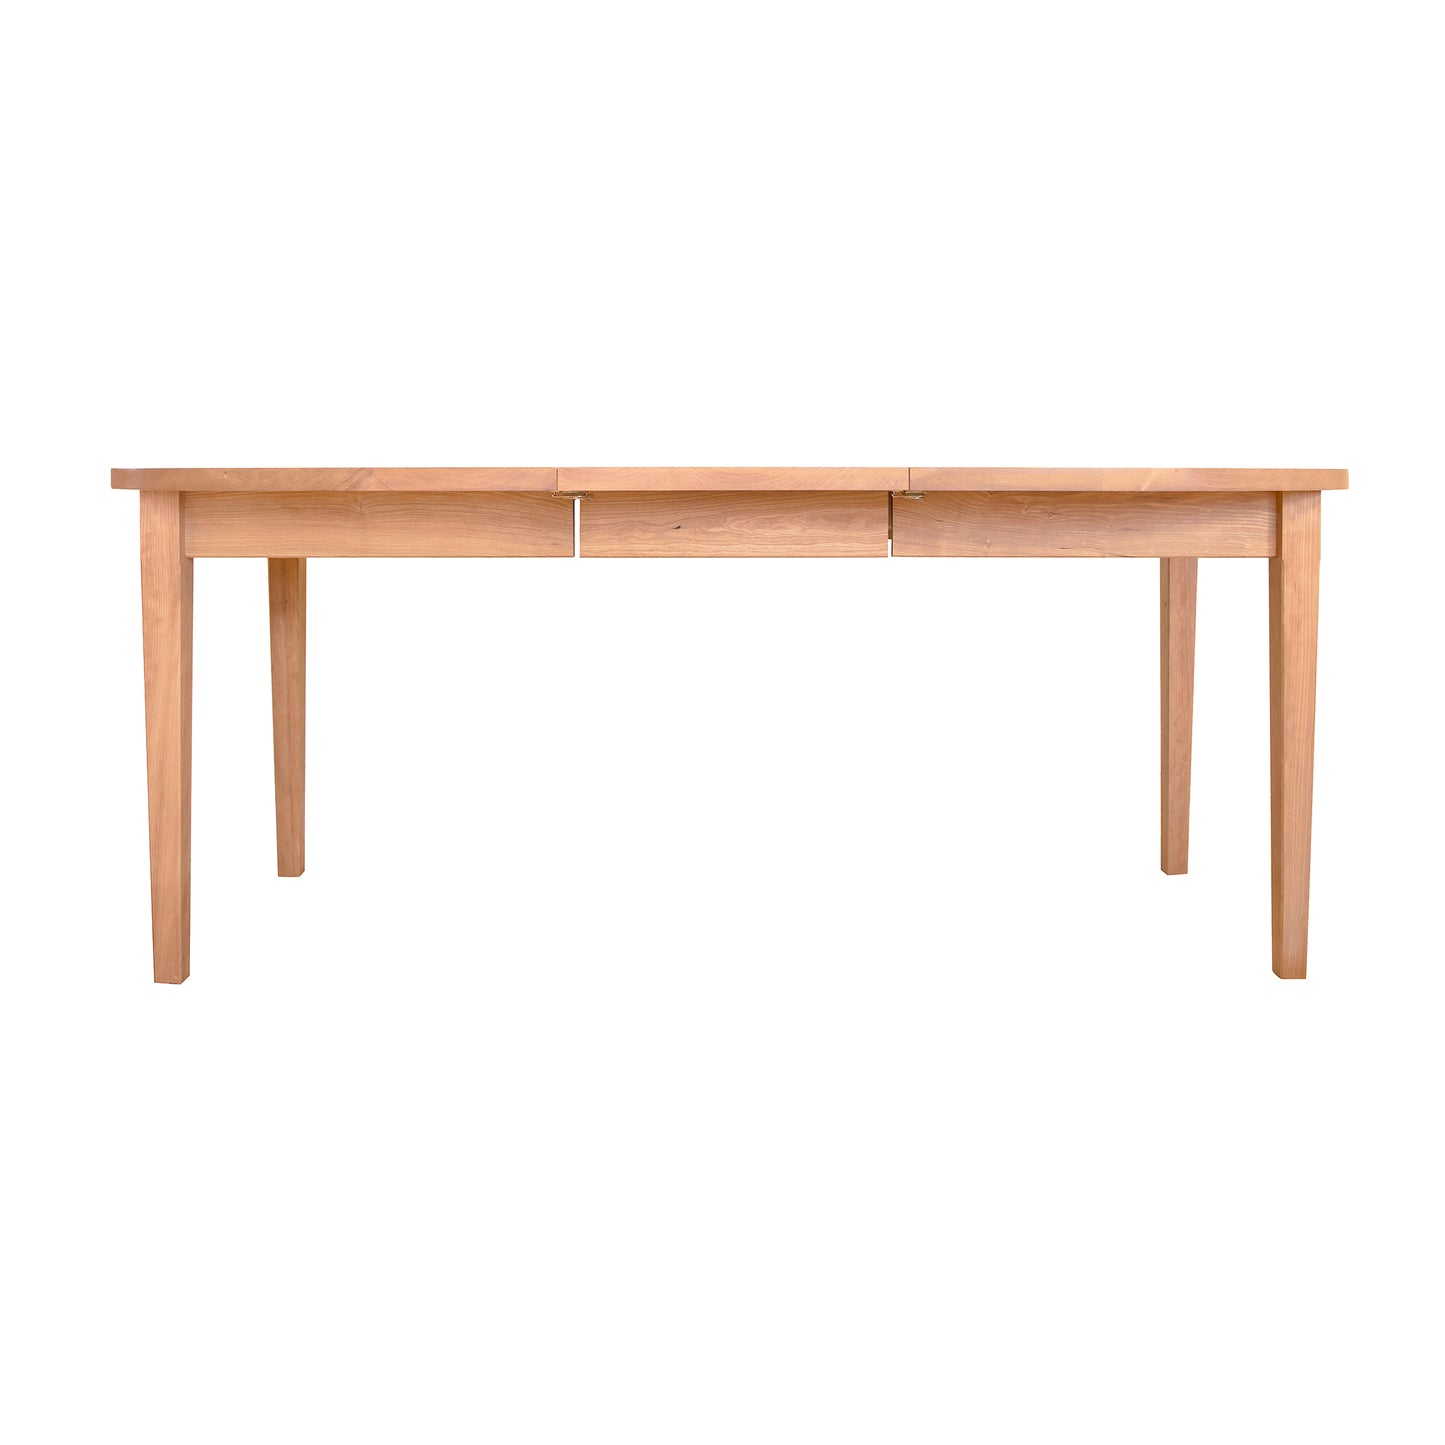 A Vermont Shaker Oval Extension Dining Table by Maple Corner Woodworks, with a rectangular top and four legs, displayed against a plain white background. The table features a minimalist design with a natural wood finish, crafted from sustainably harvested wood.